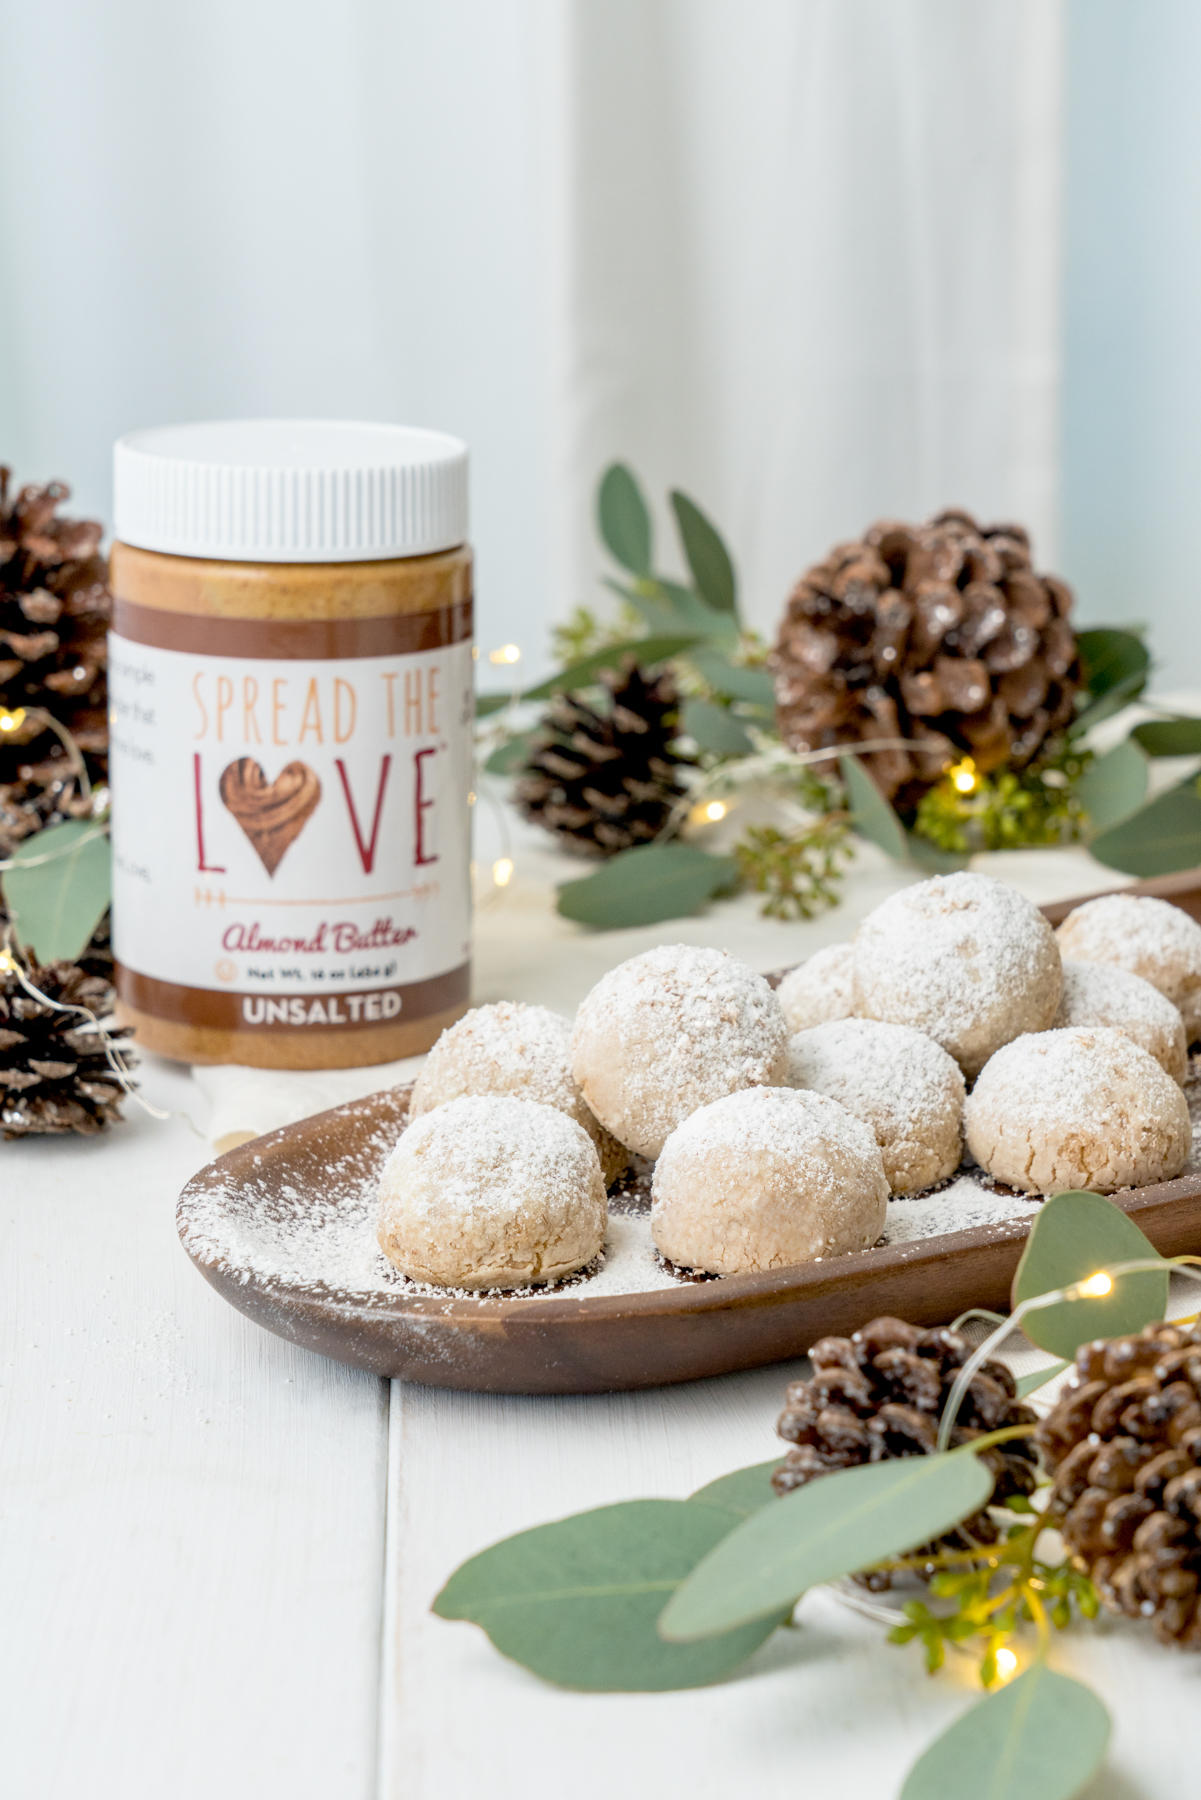 spiced almond butter snowball cookies from spread the love